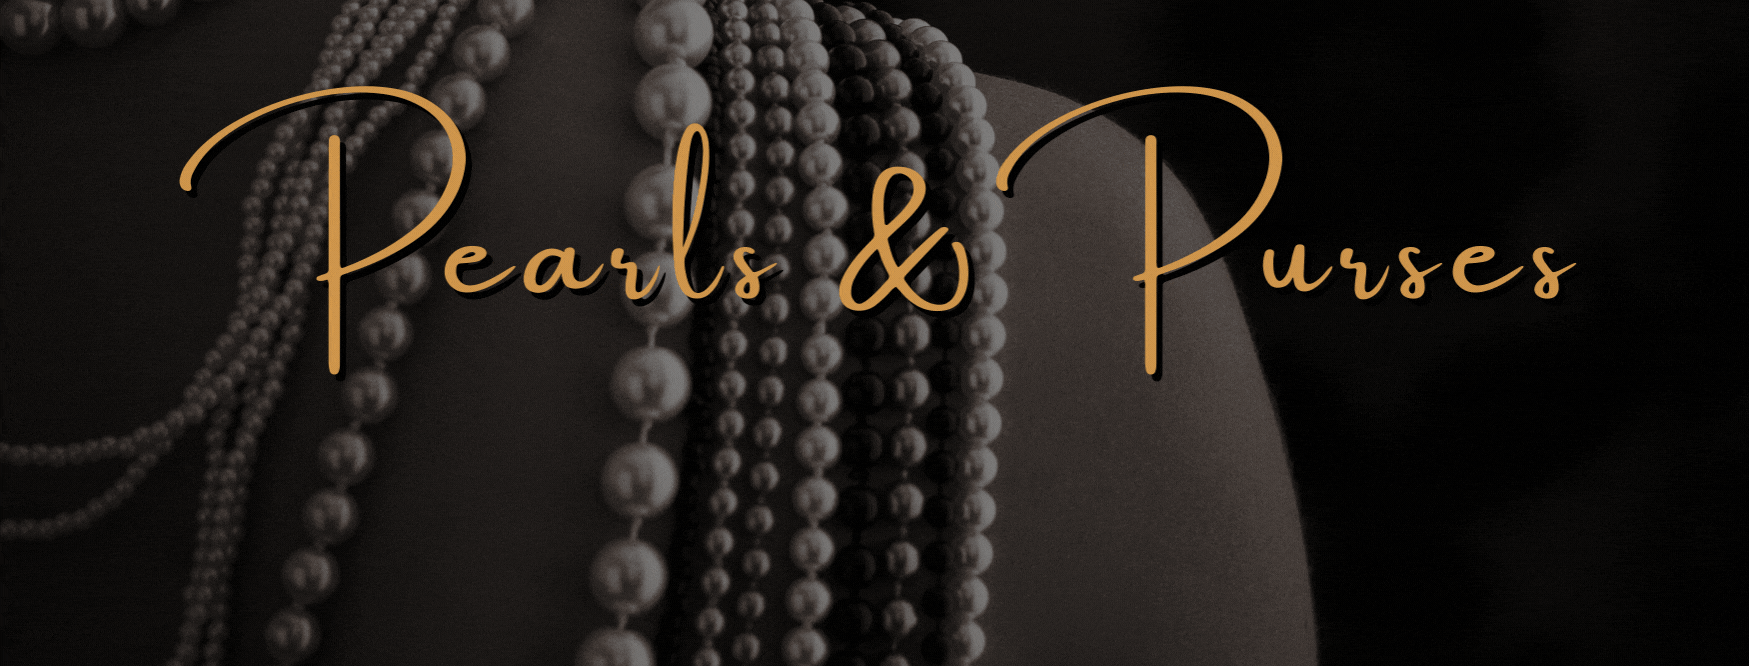 Pearls & Purses Event